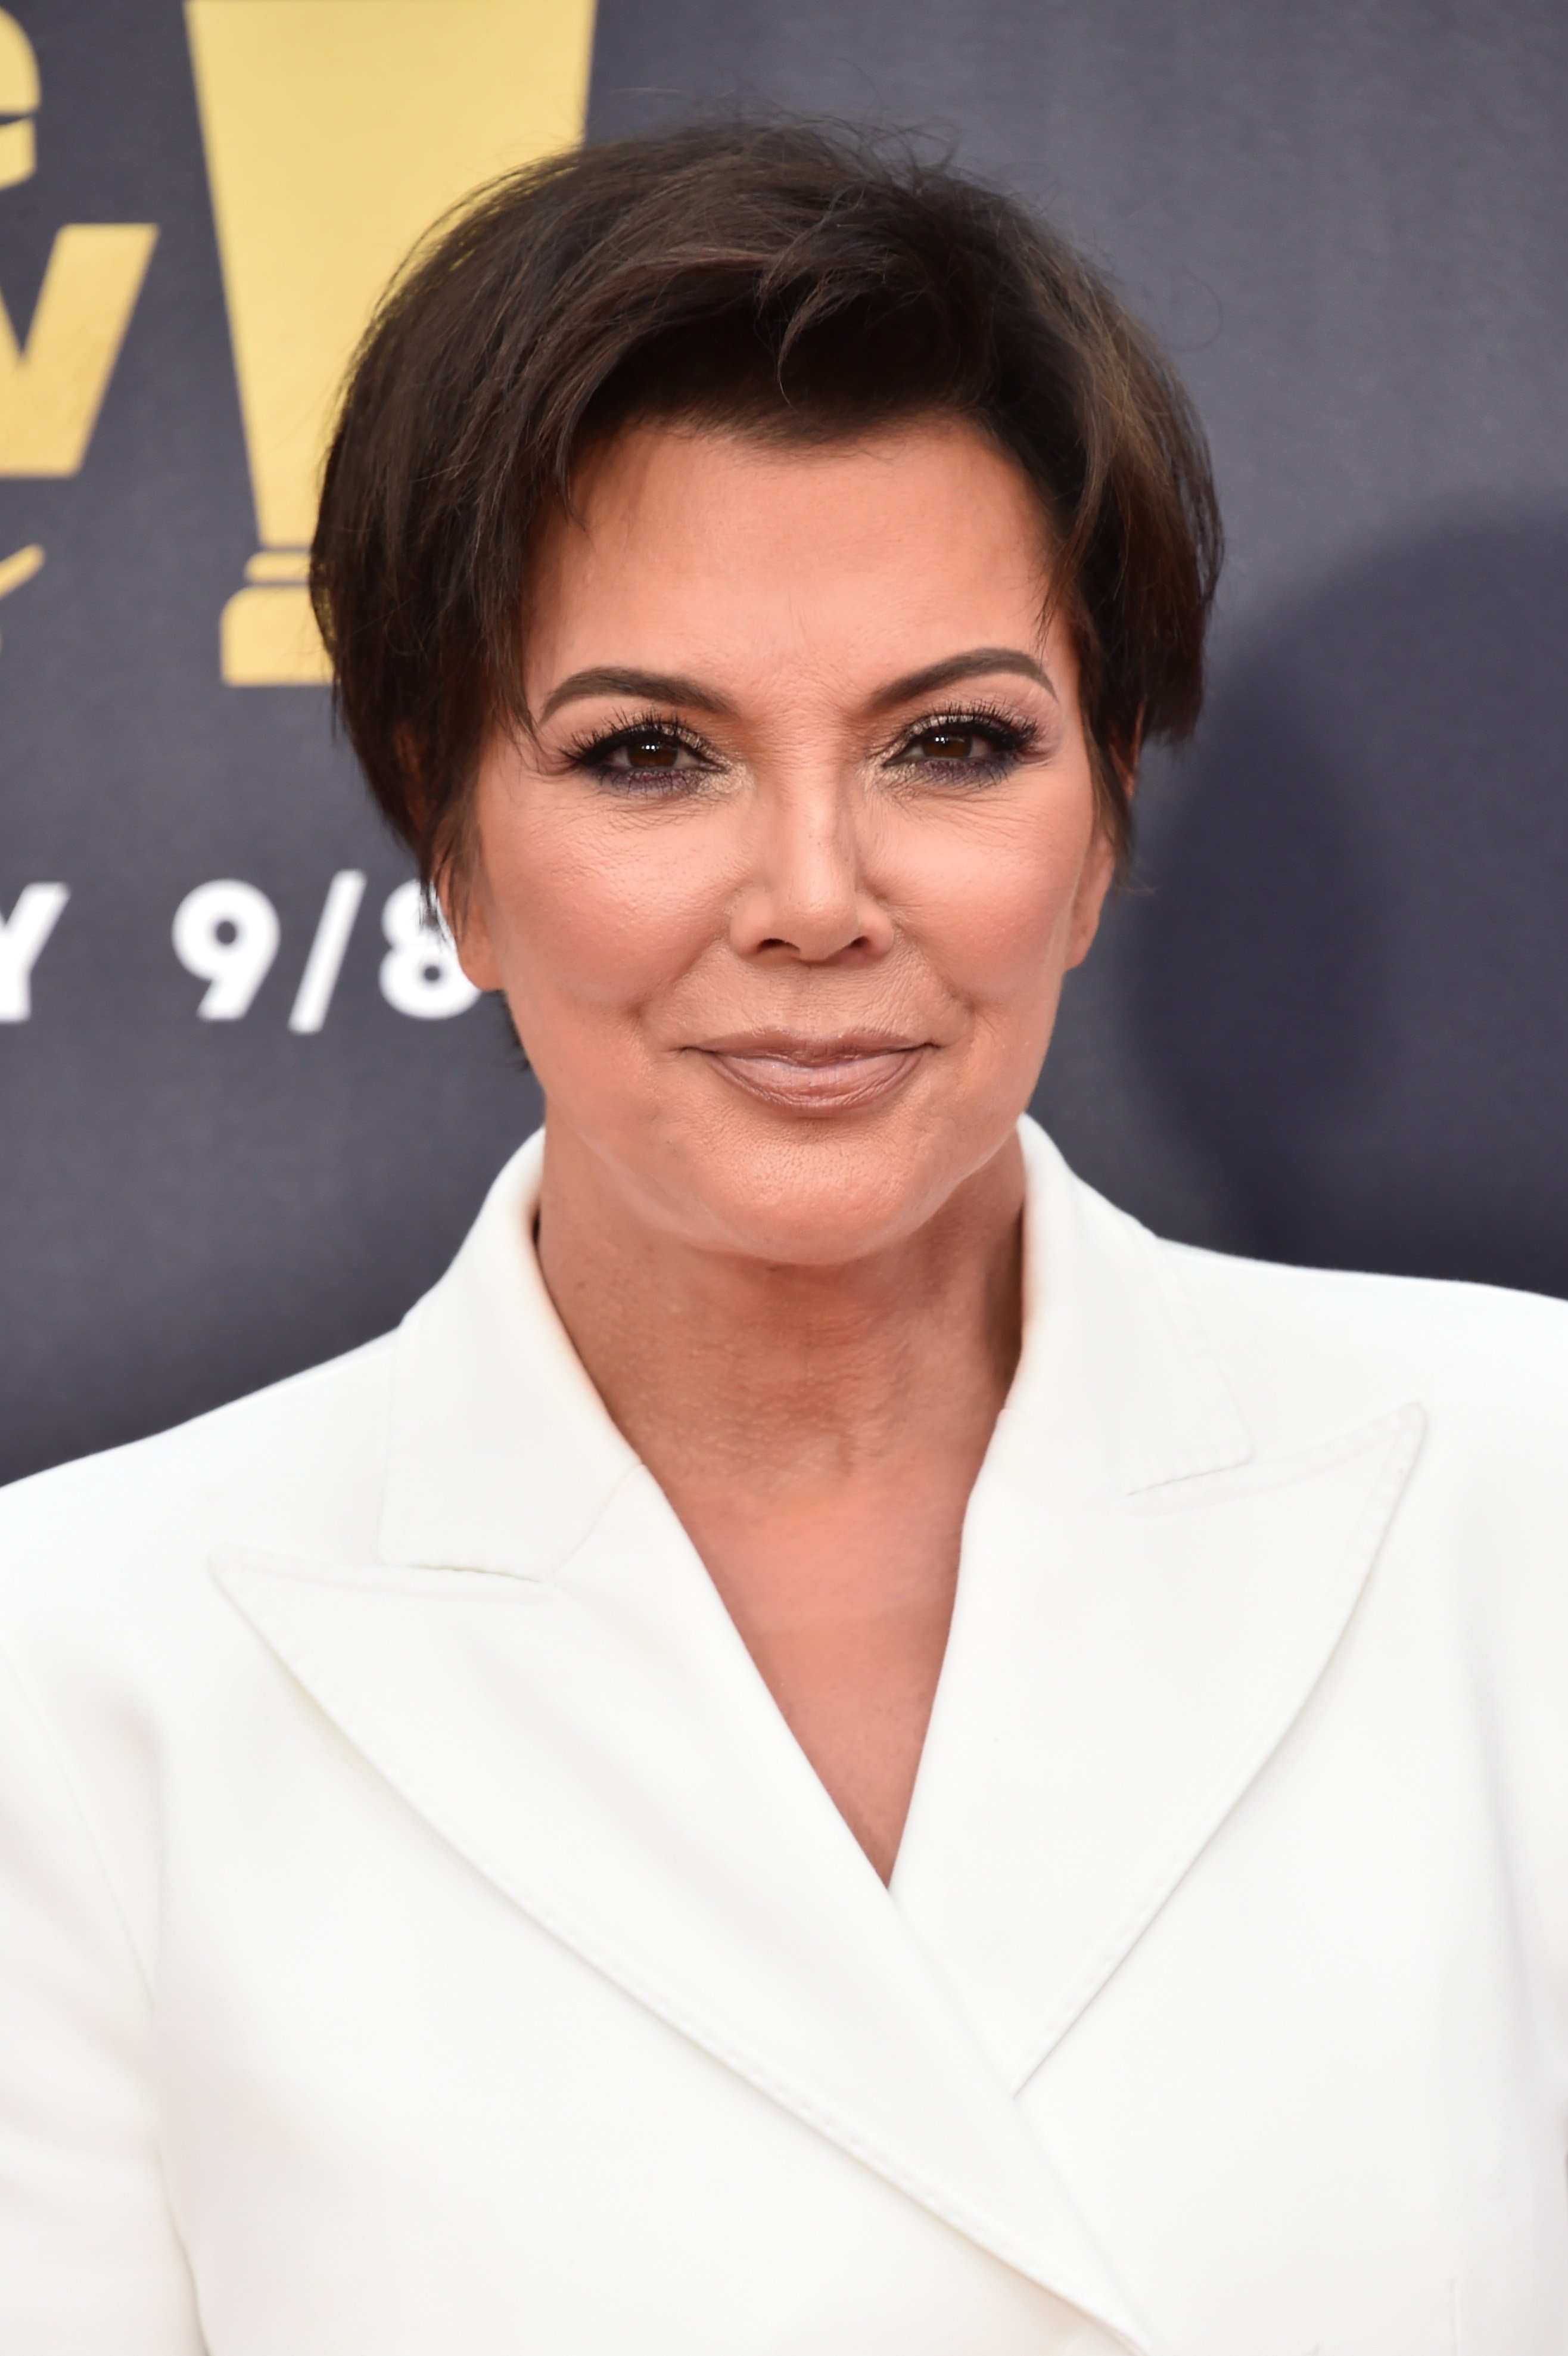 Kris Jenner at the 2018 MTV Movie and TV Awards. | Photo: Getty Images